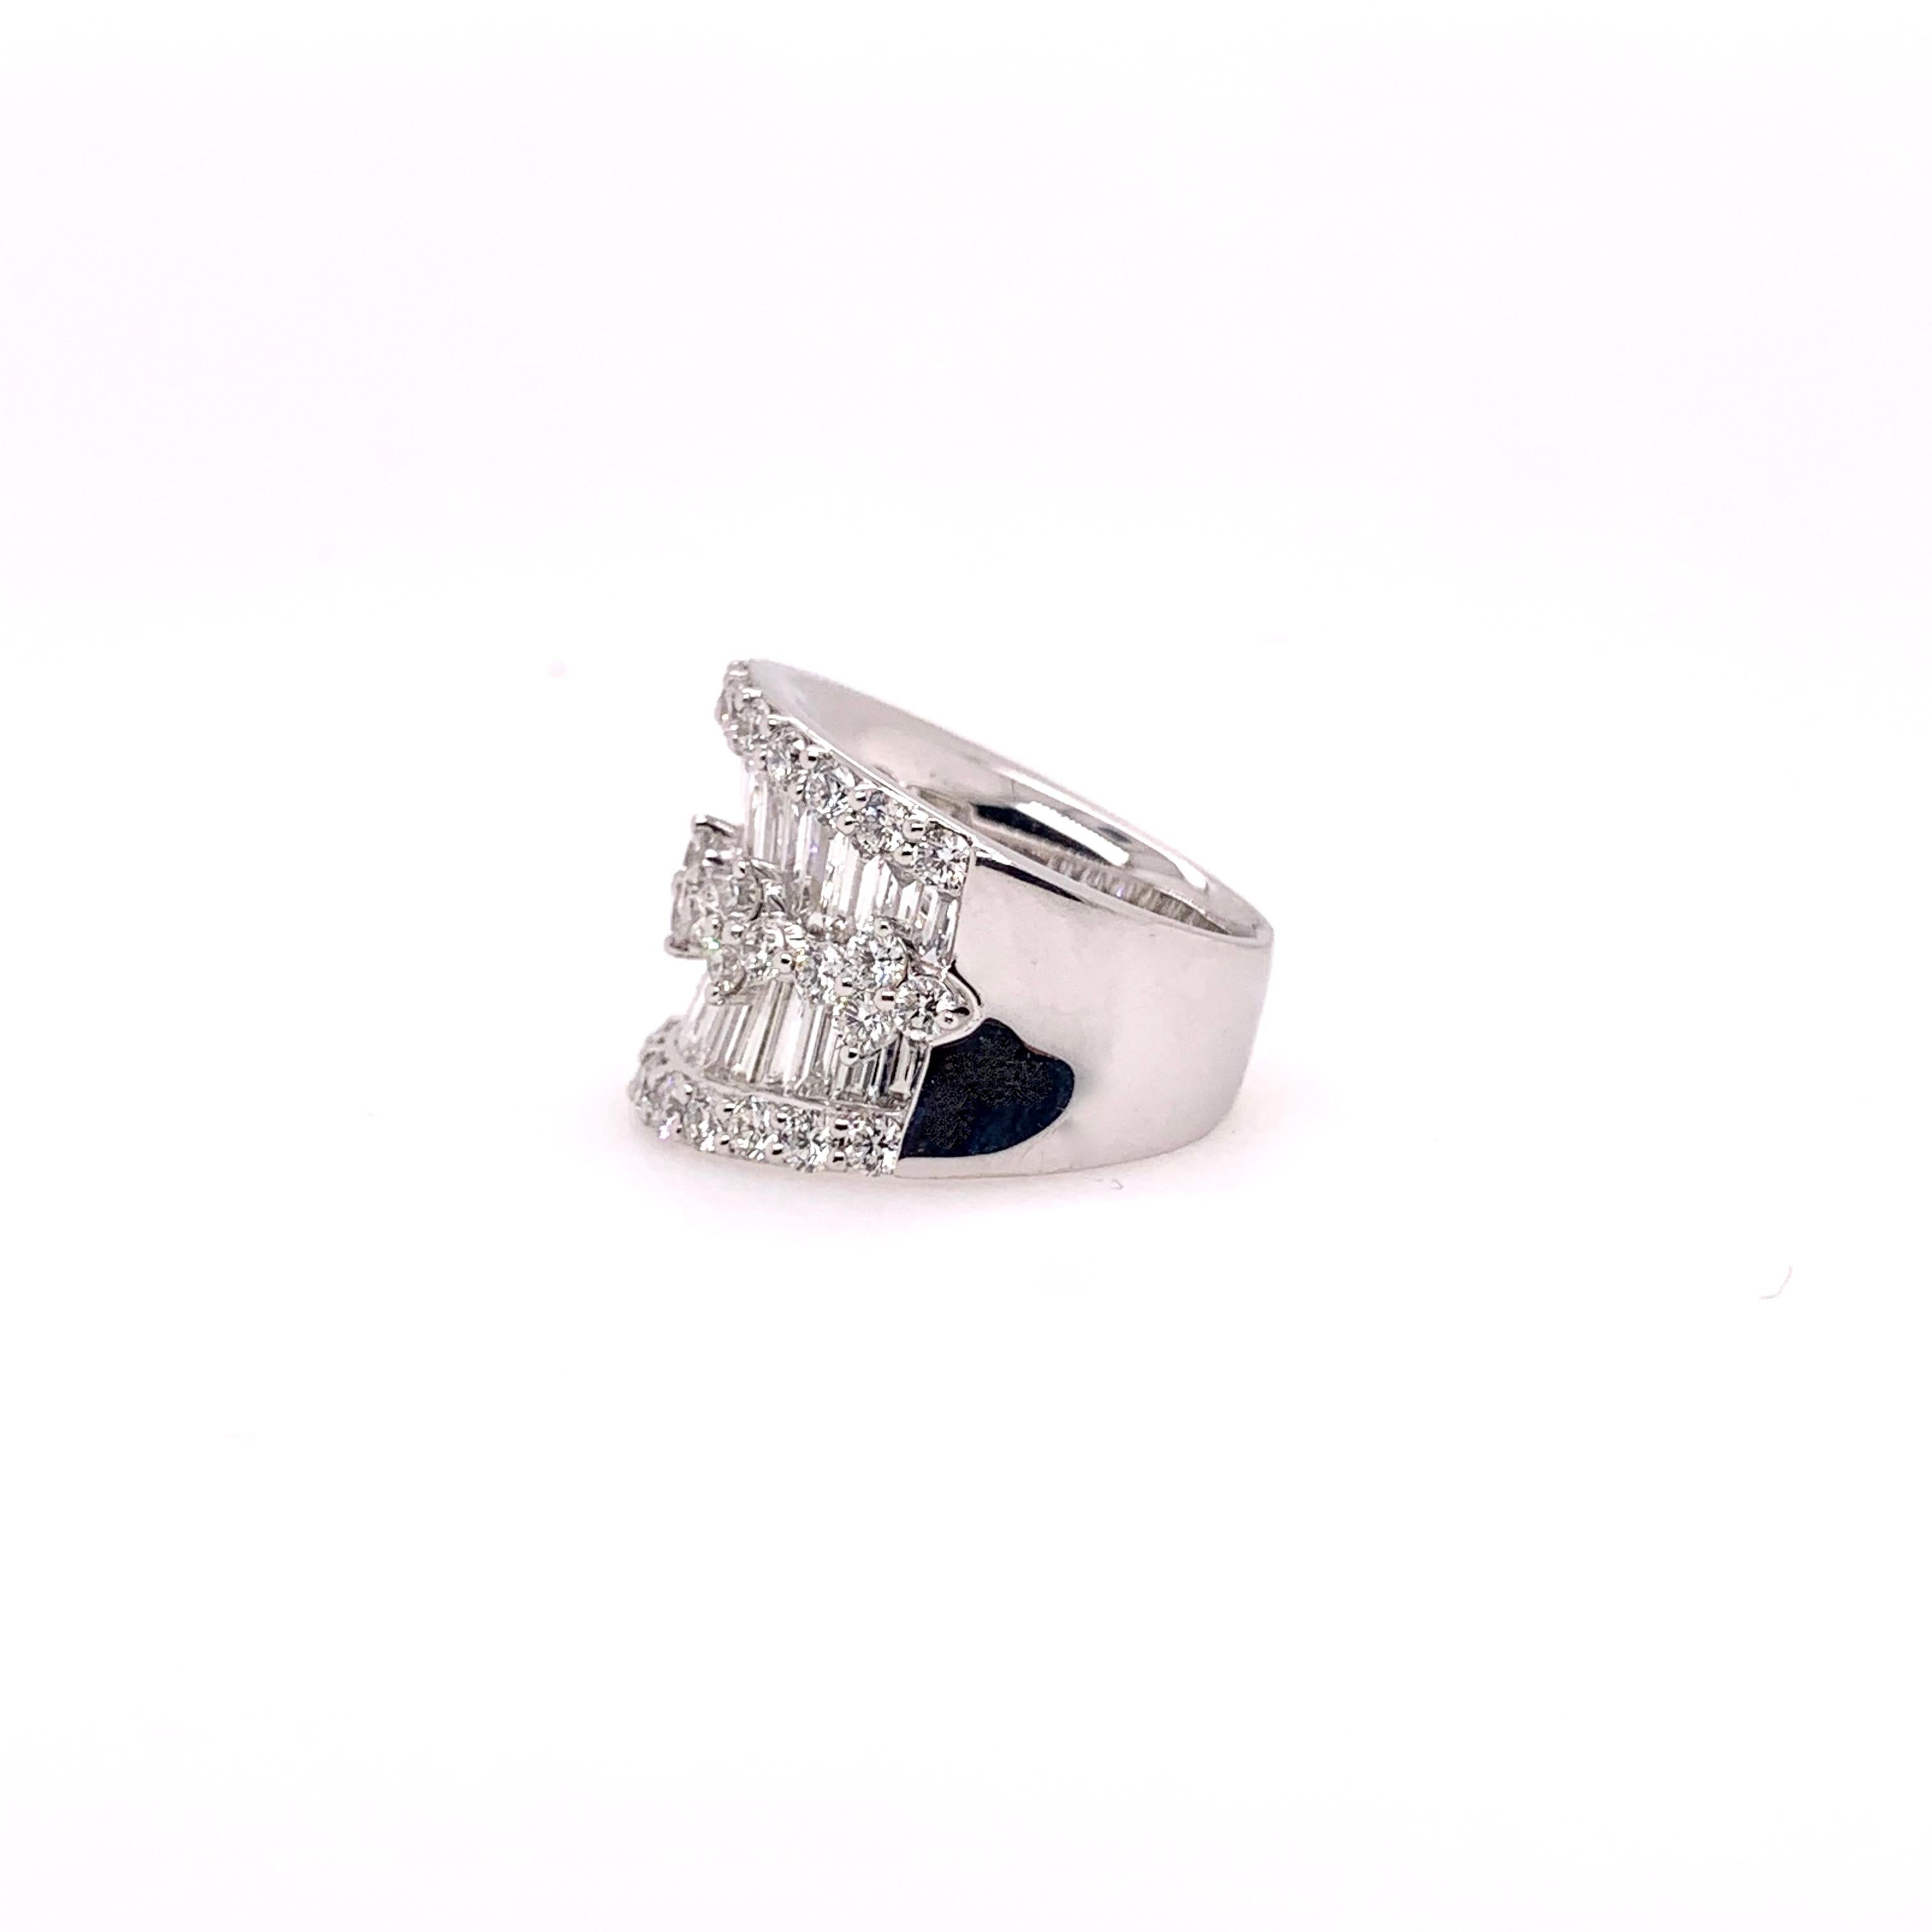 One of our signature designs, this platinum diamond band has 4.92 cts. of round brilliant cut diamonds and diamond baguettes.   It is meticulously made with the finest workmanship.  The platinum adds a solid, substantial weight to make it feel like